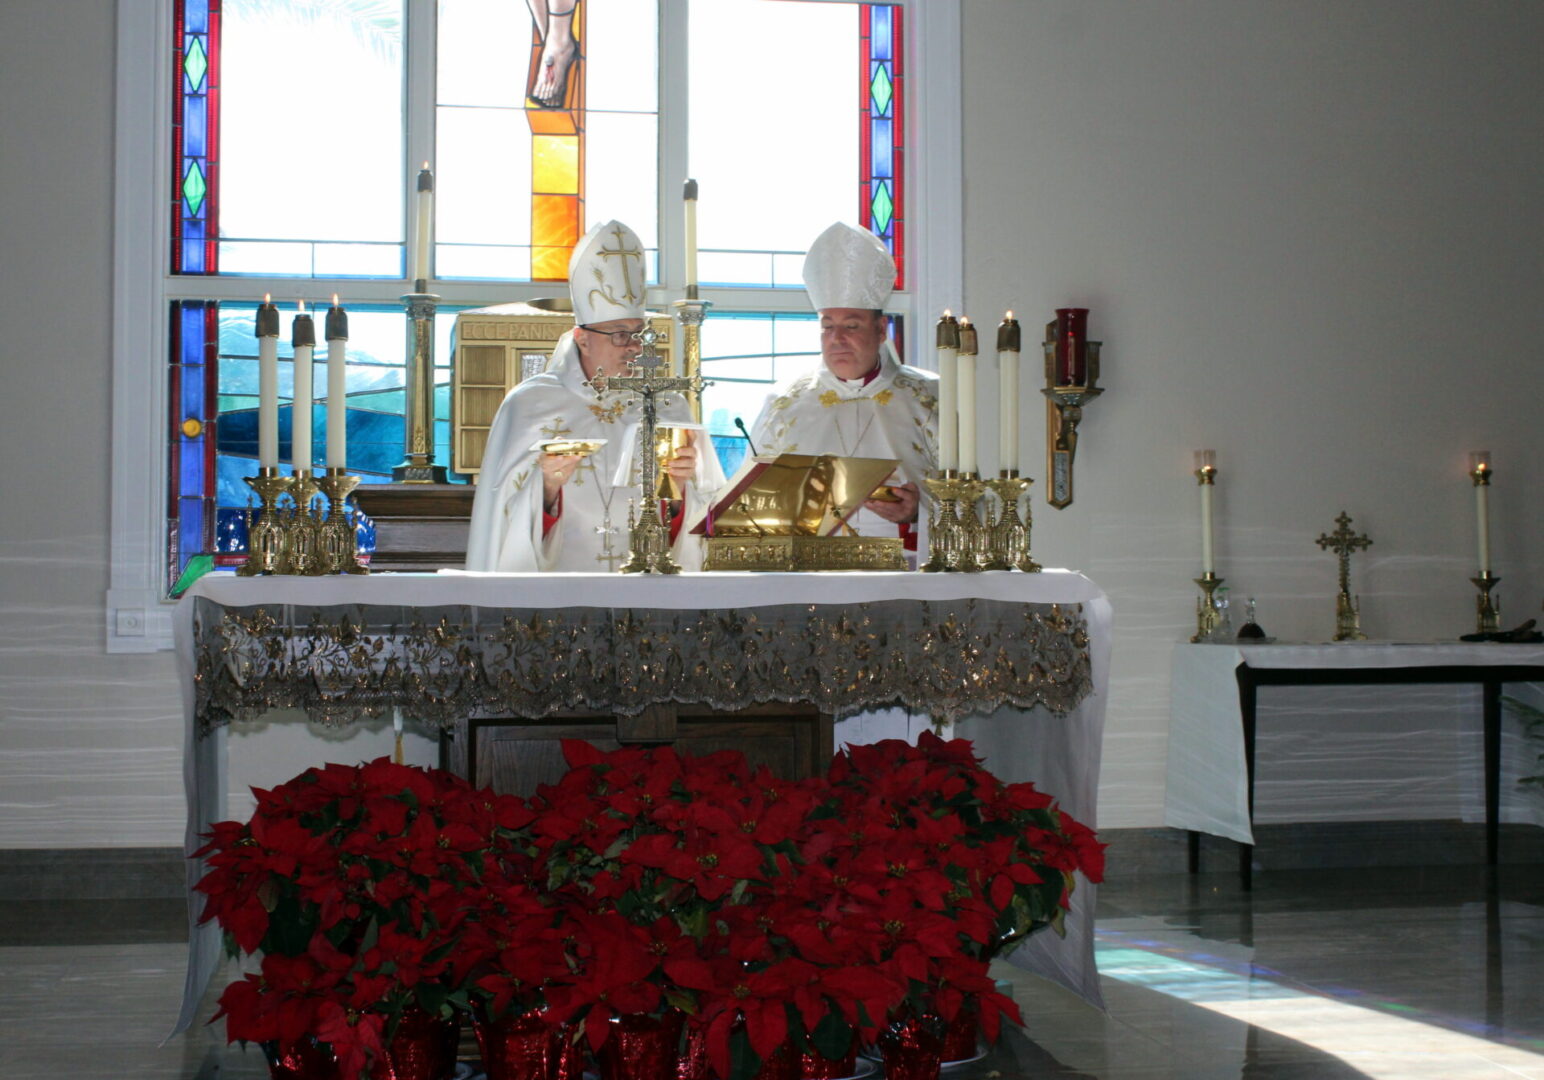 A bishop and a priest doing the communion ceremony